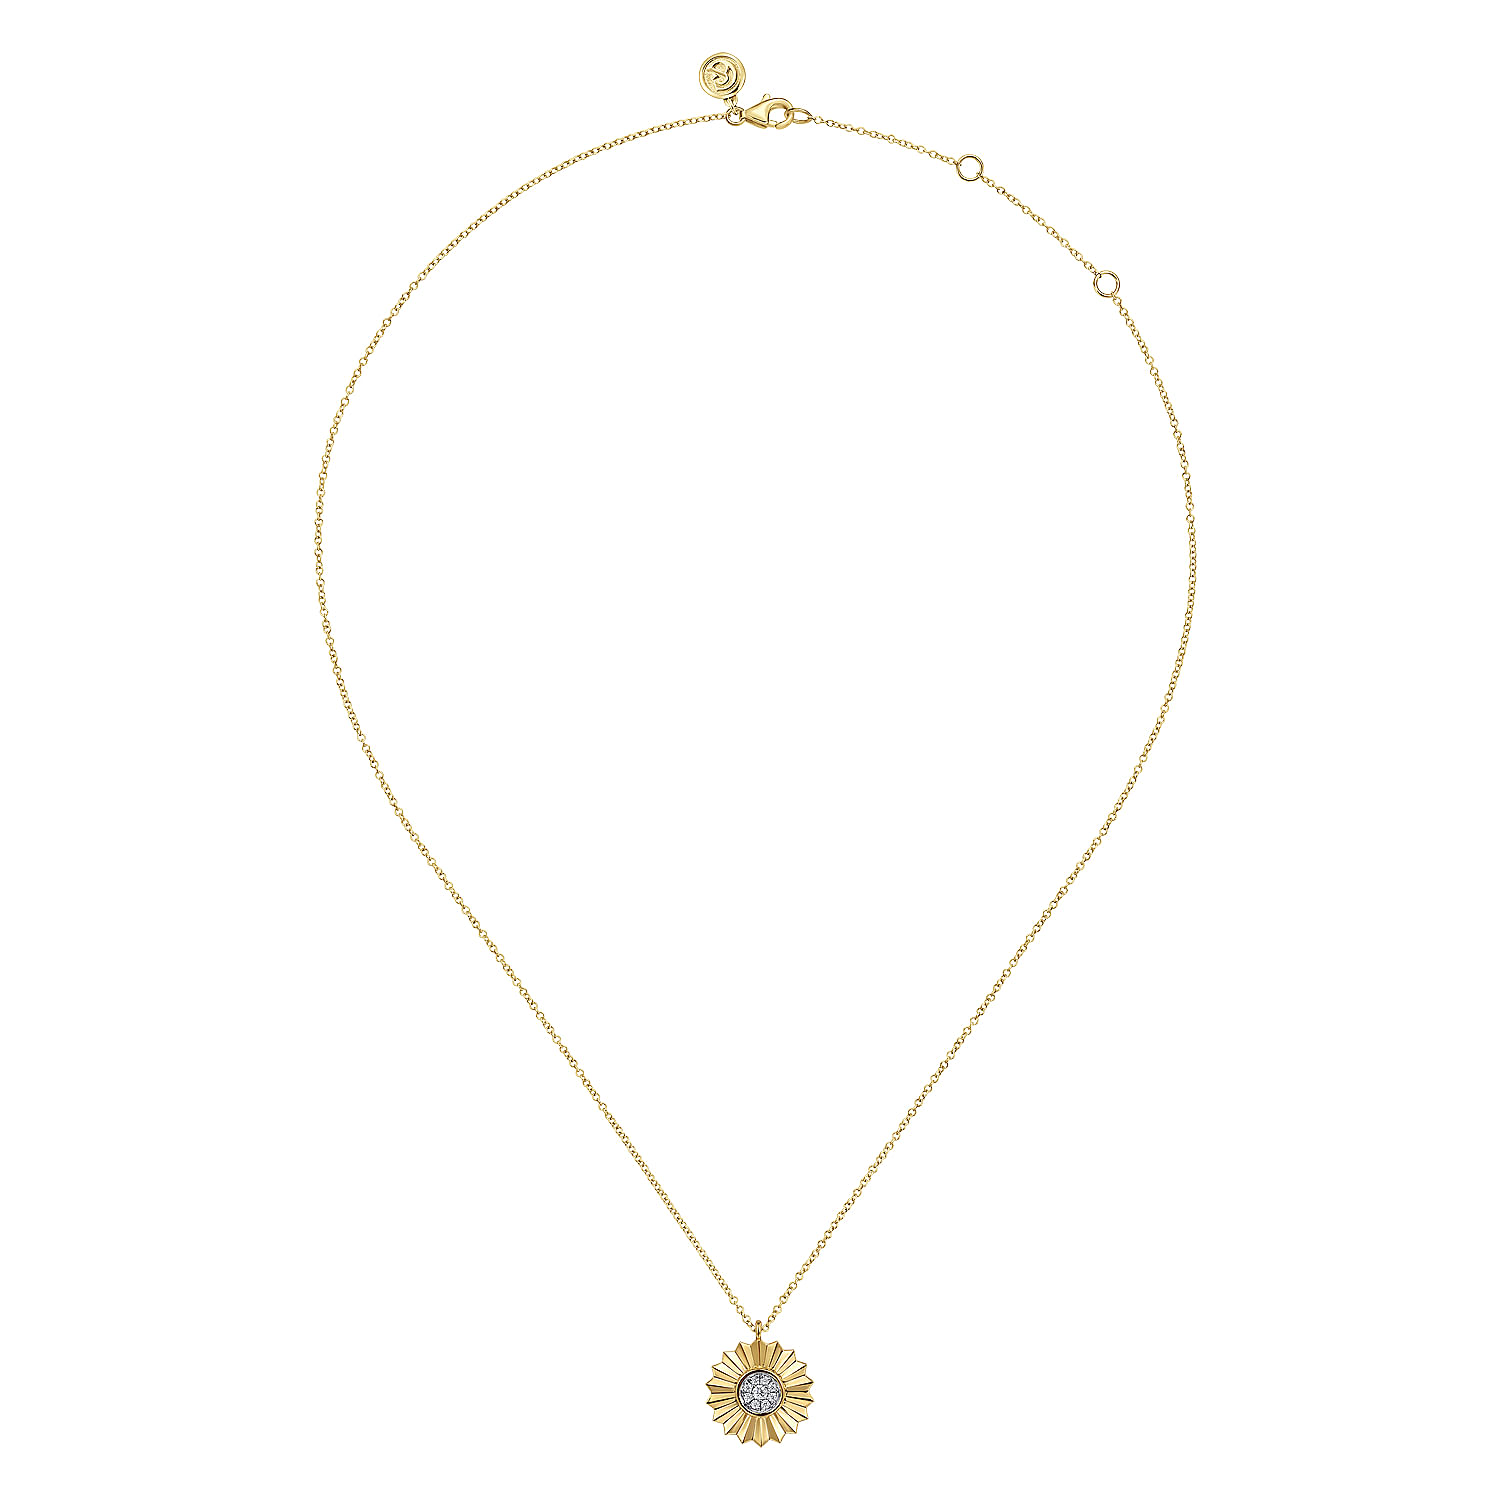 14K White and Yellow Gold Diamond Cut Pendant Necklace